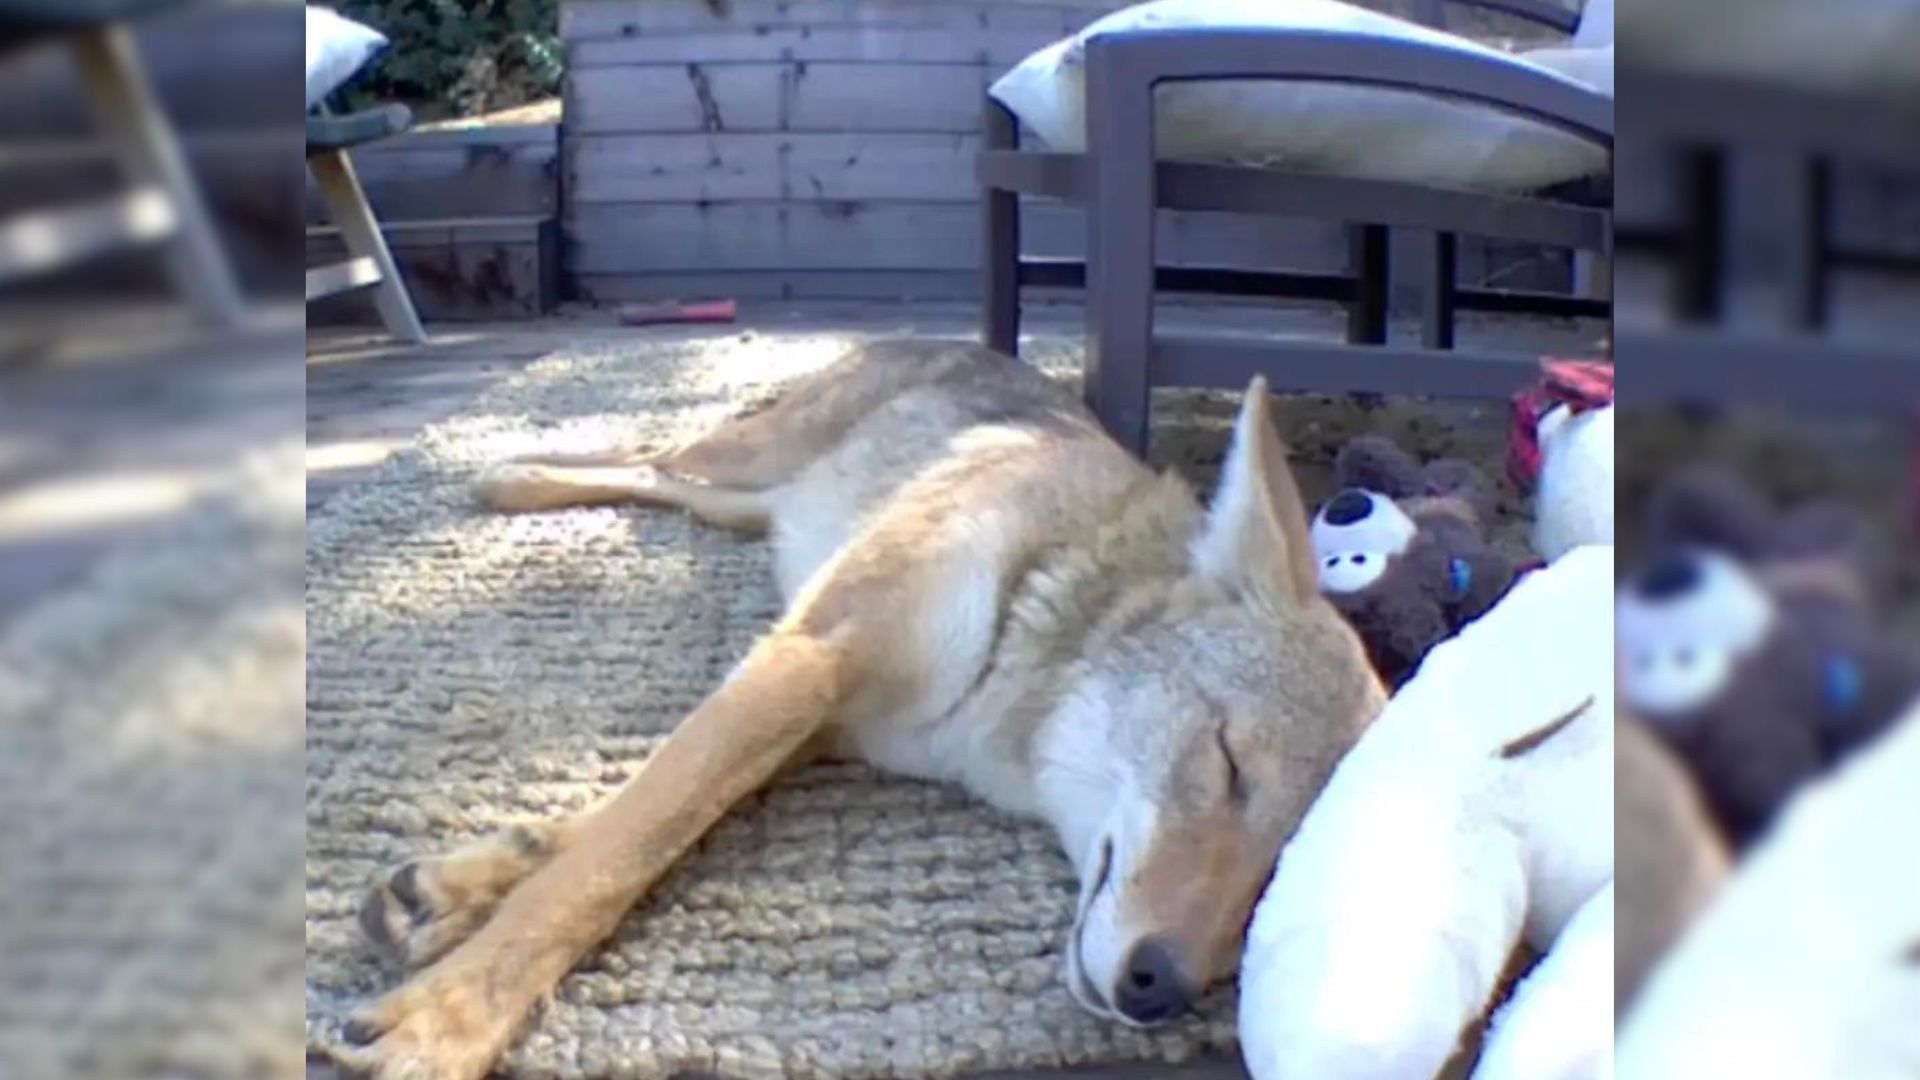 Witness How This Animal Loved Playing With Different Dog Toys Even Though She Wasn’t A Dog